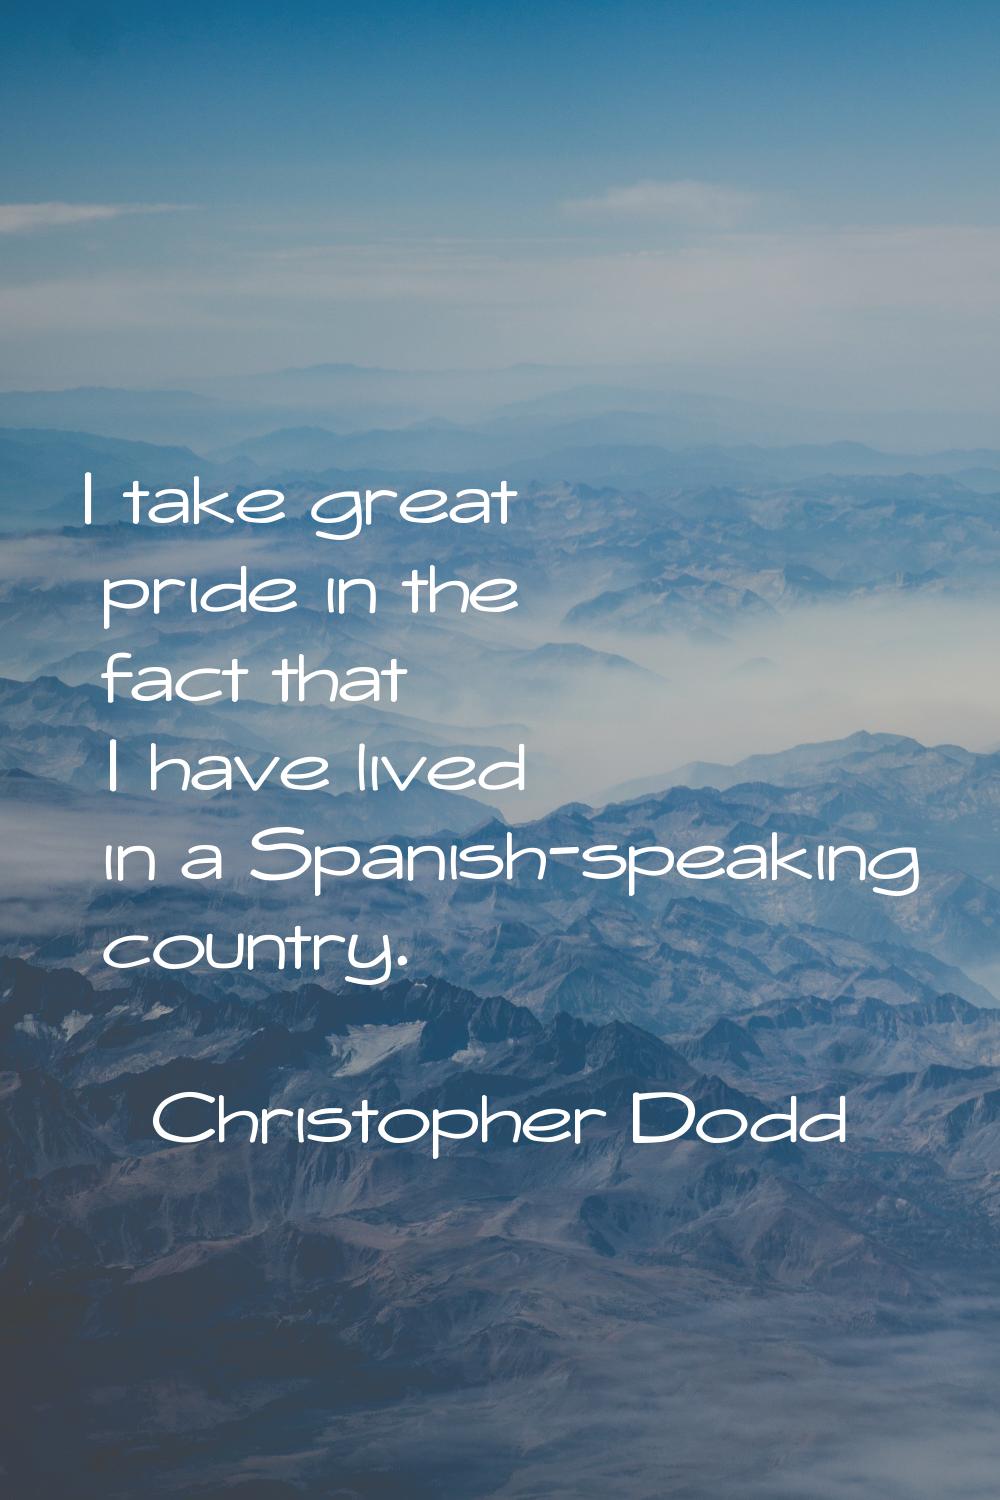 I take great pride in the fact that I have lived in a Spanish-speaking country.